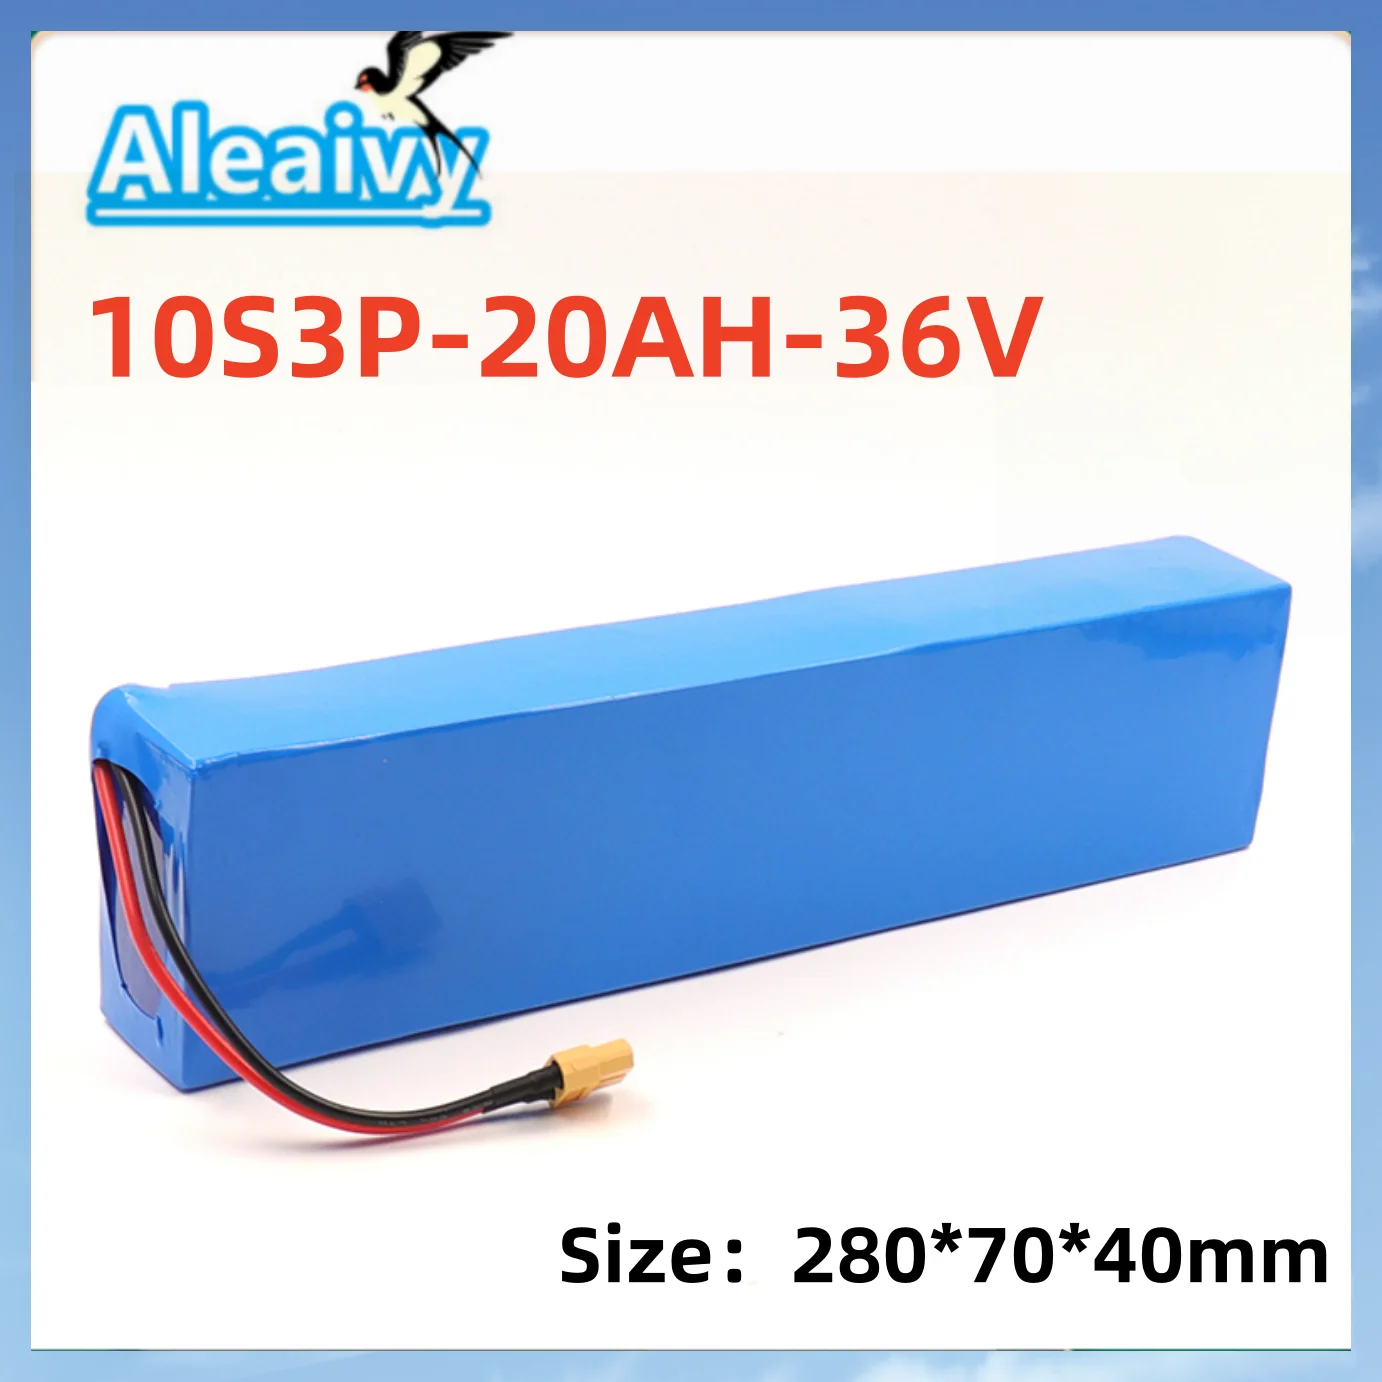 

36V Battery 10S3P 20Ah XT60 42V 18650 Lithium Ion Battery Pack for E-bike Electric Car Bicycle Motor Scooter 350W 500W +20A BMS